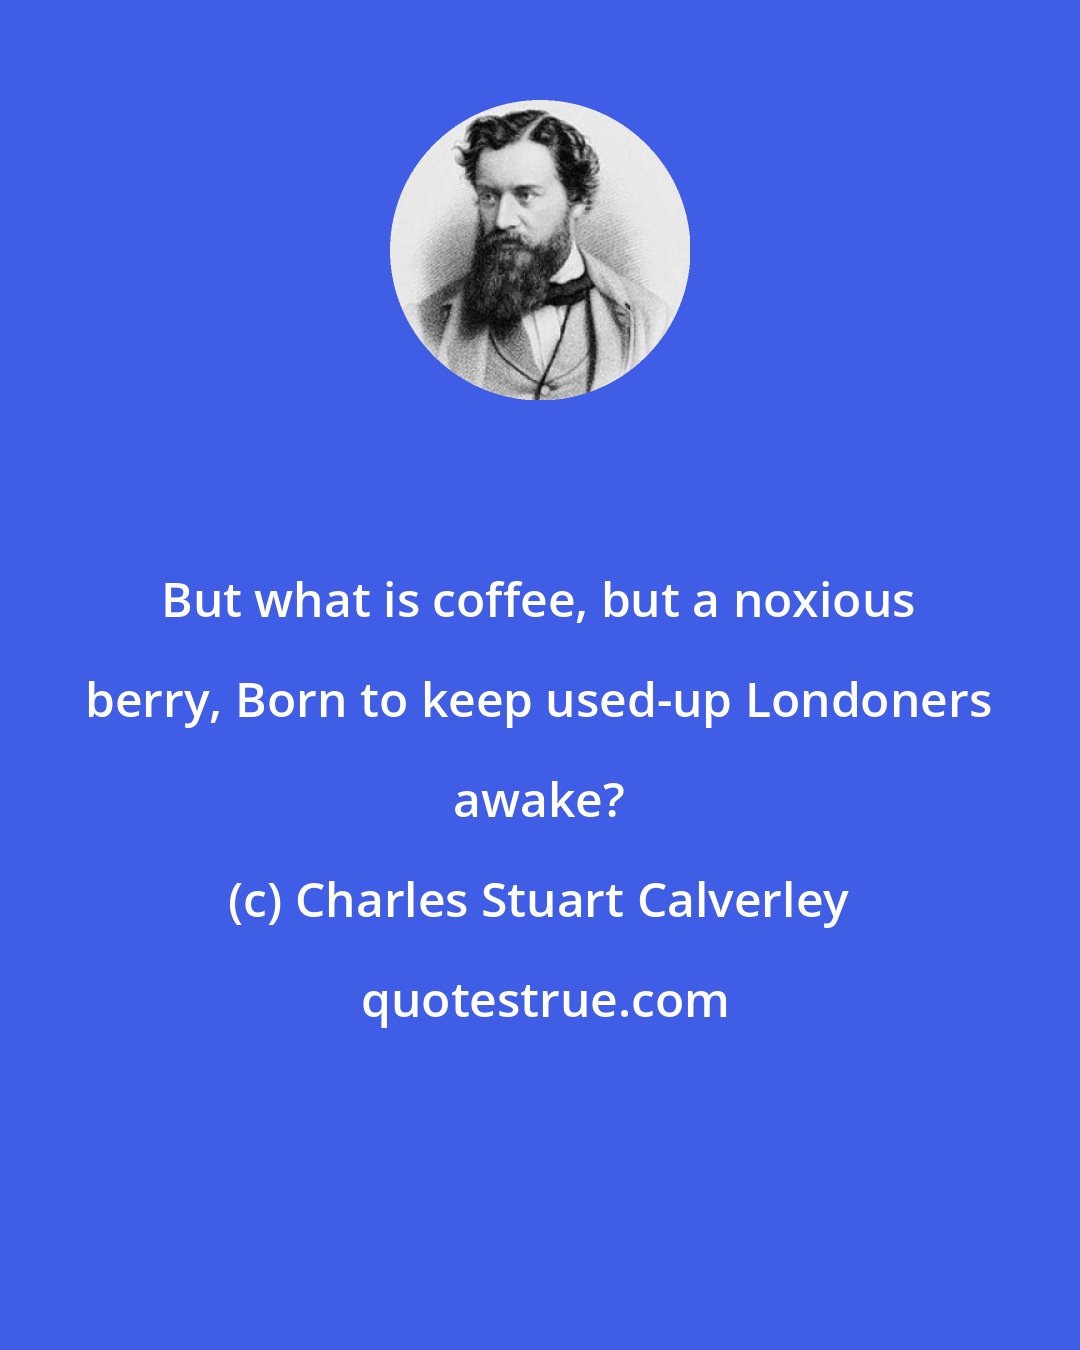 Charles Stuart Calverley: But what is coffee, but a noxious berry, Born to keep used-up Londoners awake?